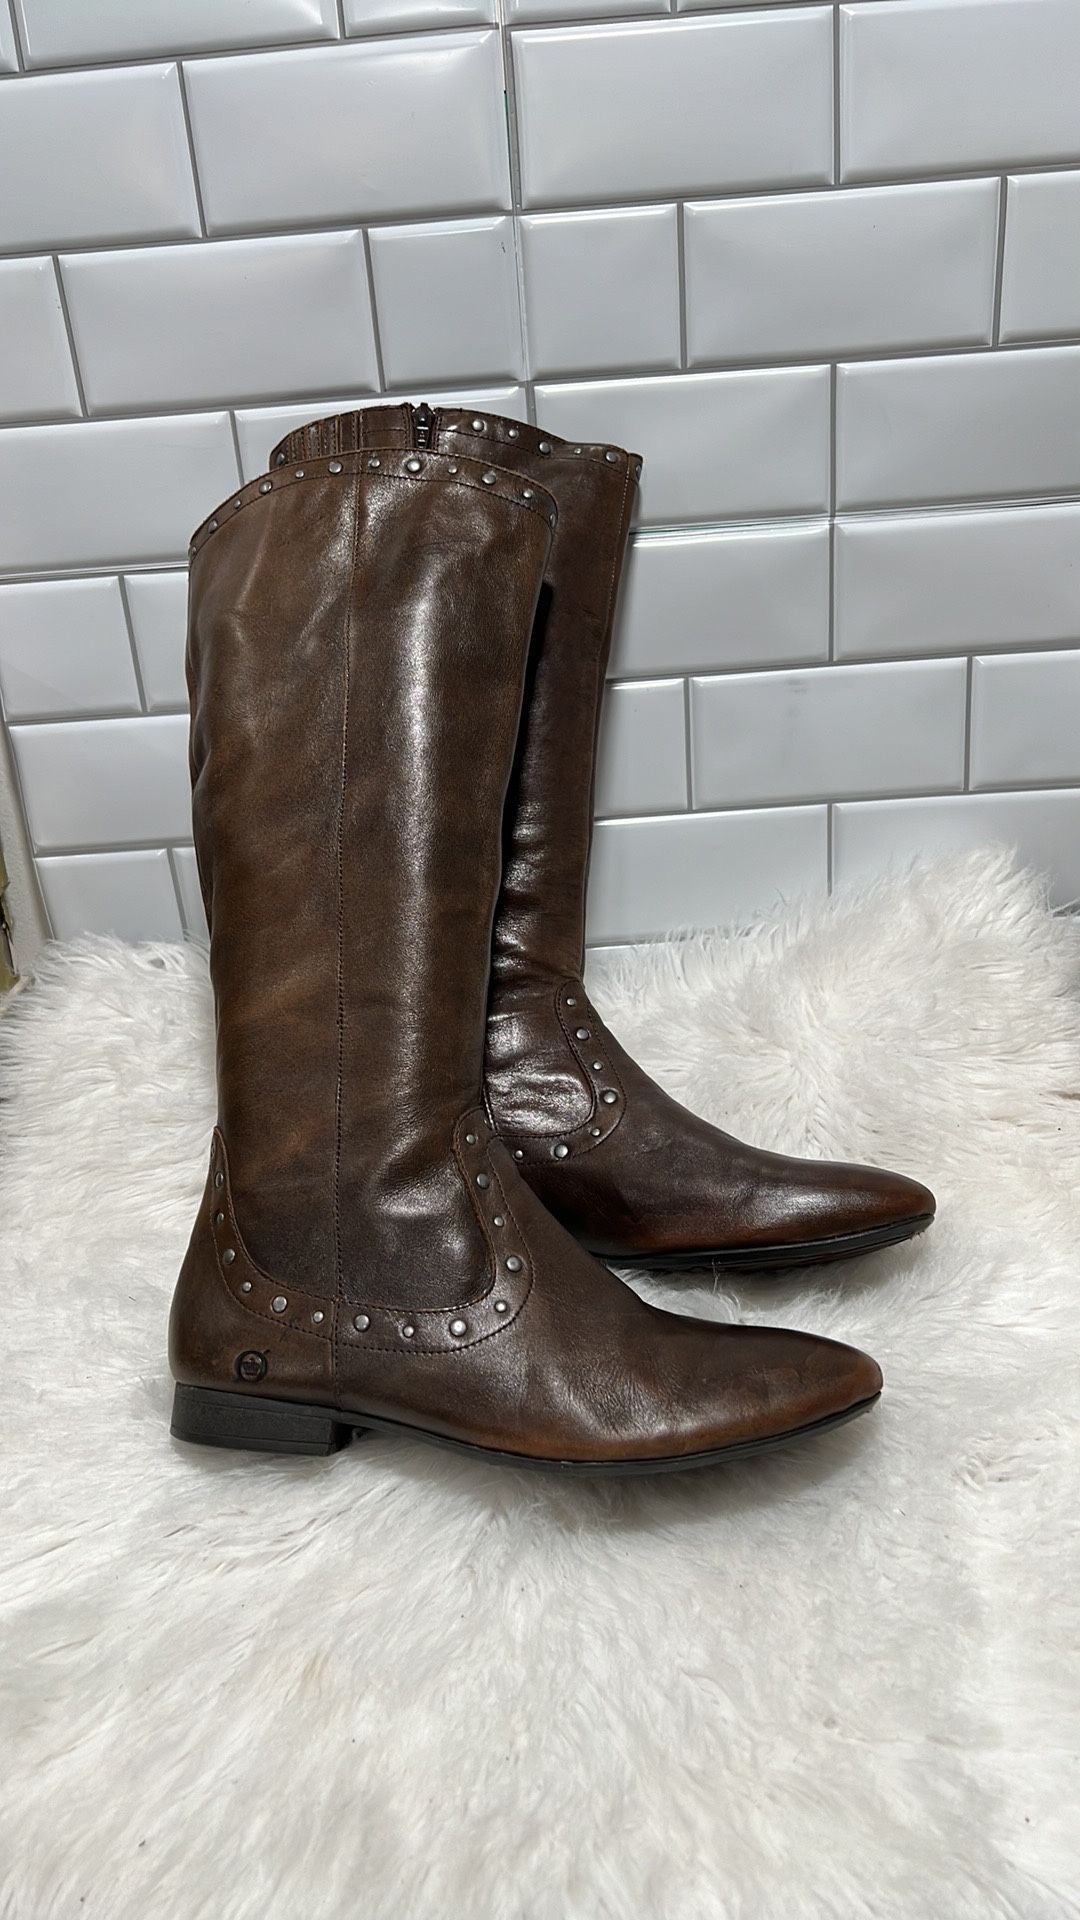 Born Women Studded Brown Leather Flat Zip Tall fashion Boots size 9.5 